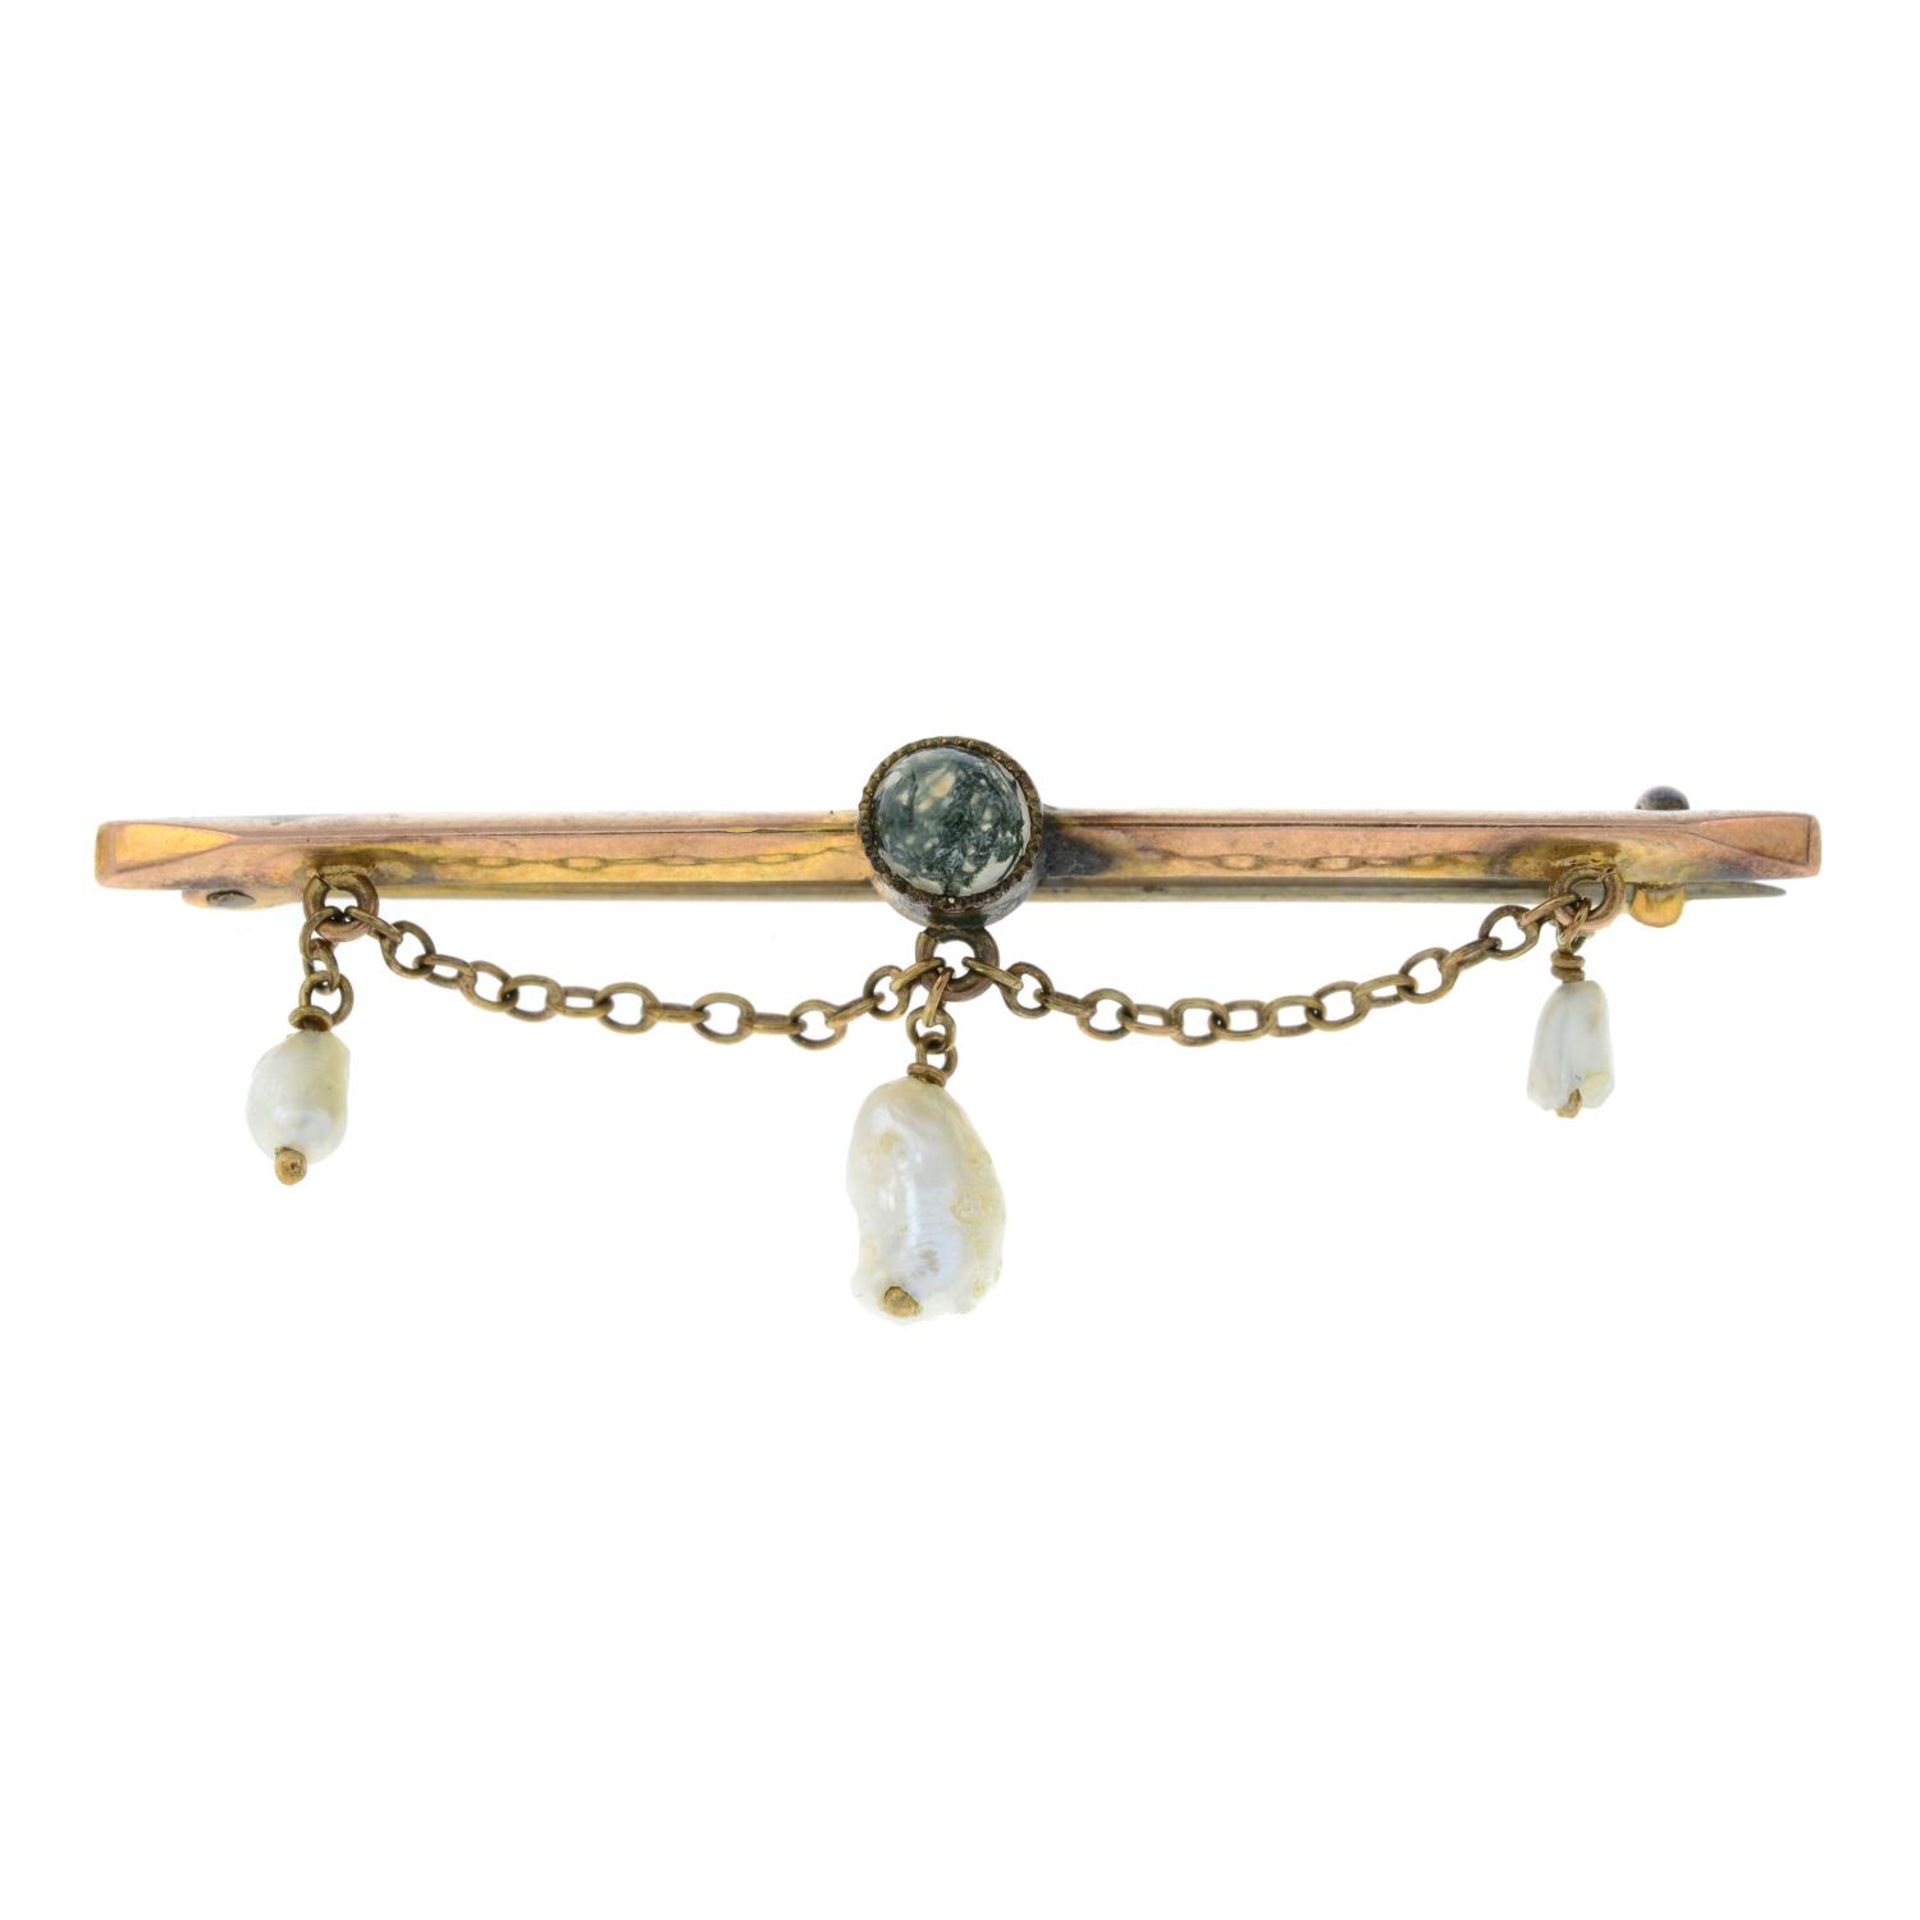 A 9ct gold moss agate bar brooch with suspended seed pearls.Stamped 9ct.Length 4.4gms.